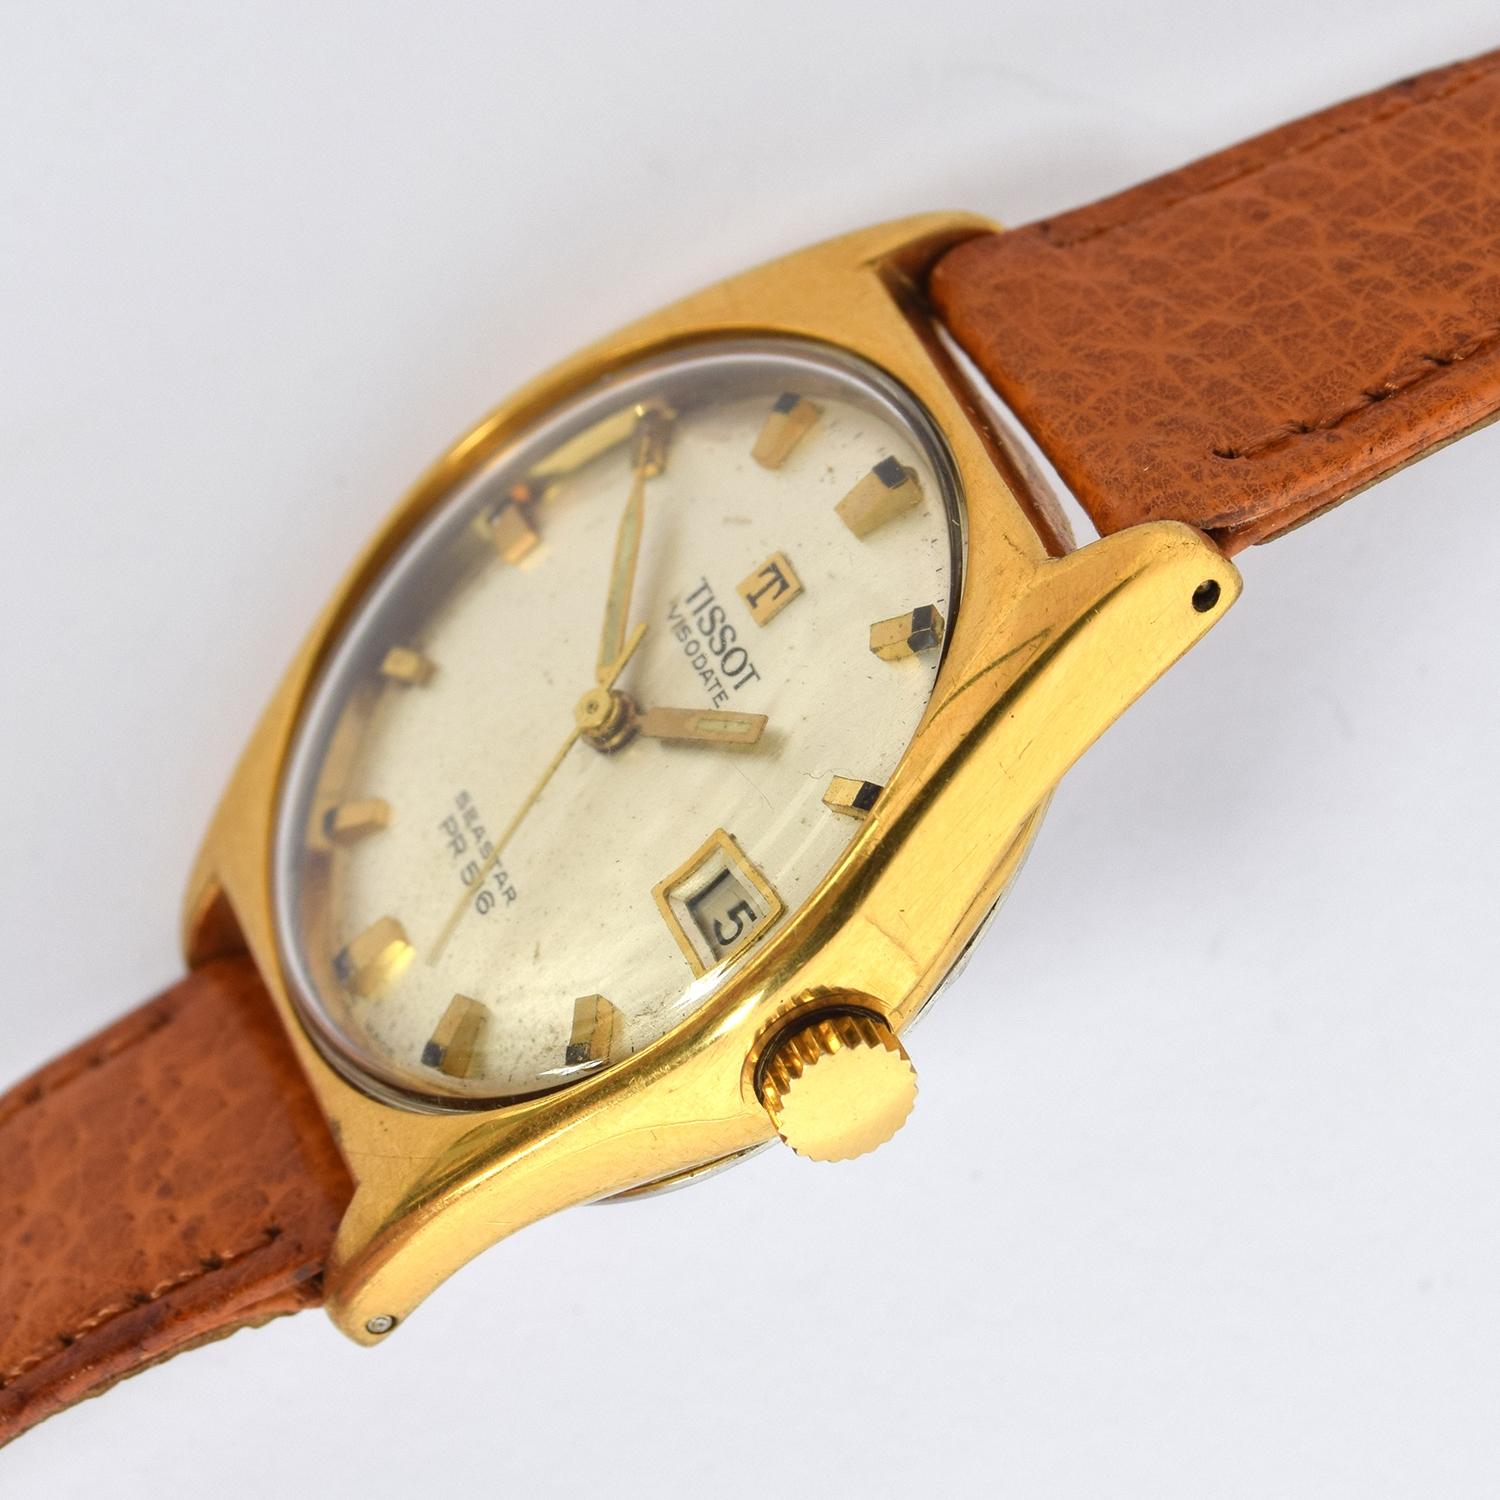 A TISSOT VISODATE SEASTAR PR516 GENTLEMAN'S STEEL AND GOLD PLATED WATCH Circa 1960s, silvered dial - Image 2 of 3